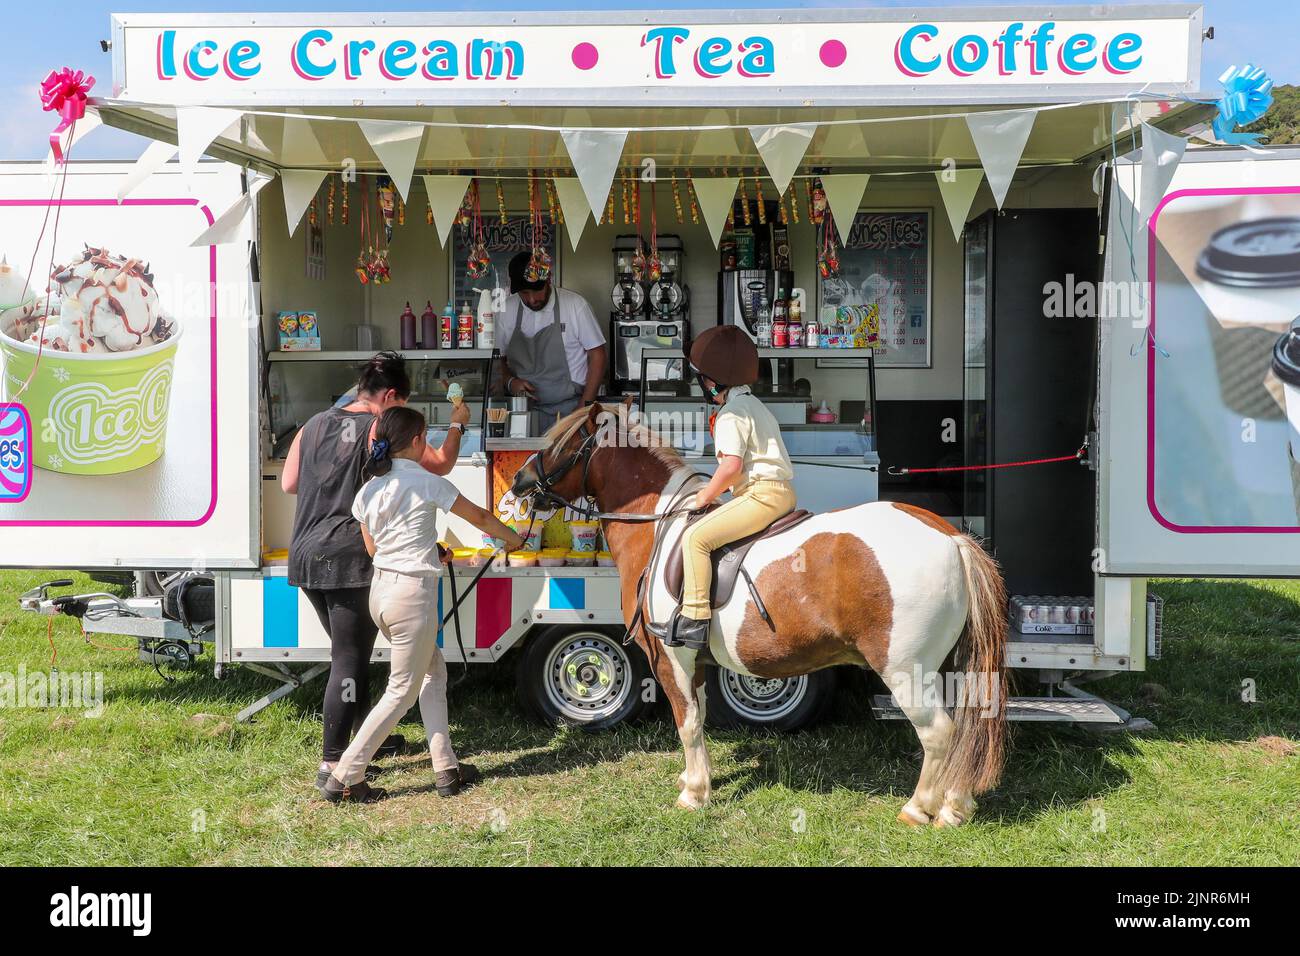 13 August 2022, Craigie, UK. After a tiring and thirsty apprearance at Craigie Country Fair, Micheal, a 12 year old Shetland Pony and his rider Jessica Edgar, aged 5,are rewarded with an ice cream to cool down. Michael's owner Alba Morgan, aged 9, is offering the ice cream to Michael. (Stephanie Edgar, mother is present). Credit: Findlay/ Alamy Live News. Stock Photo